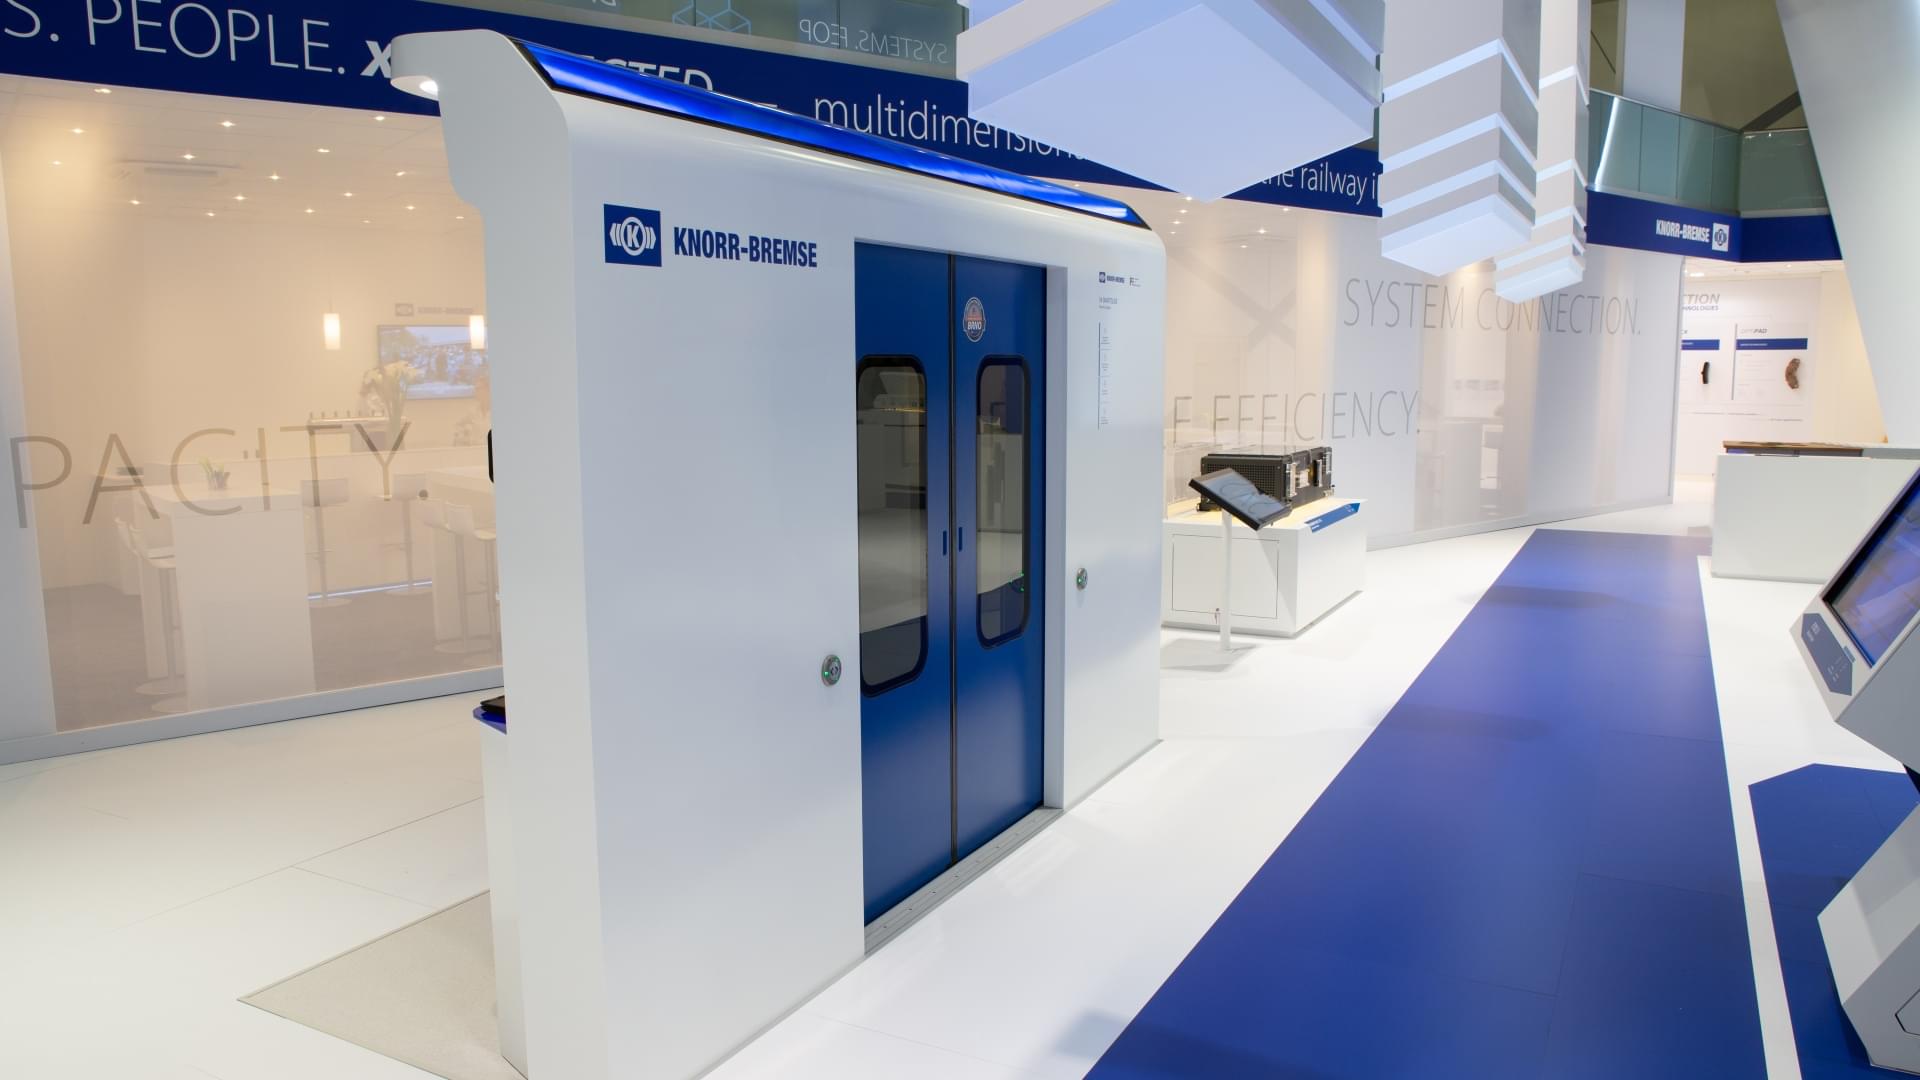 S4 SmartSlide at the InnoTrans event